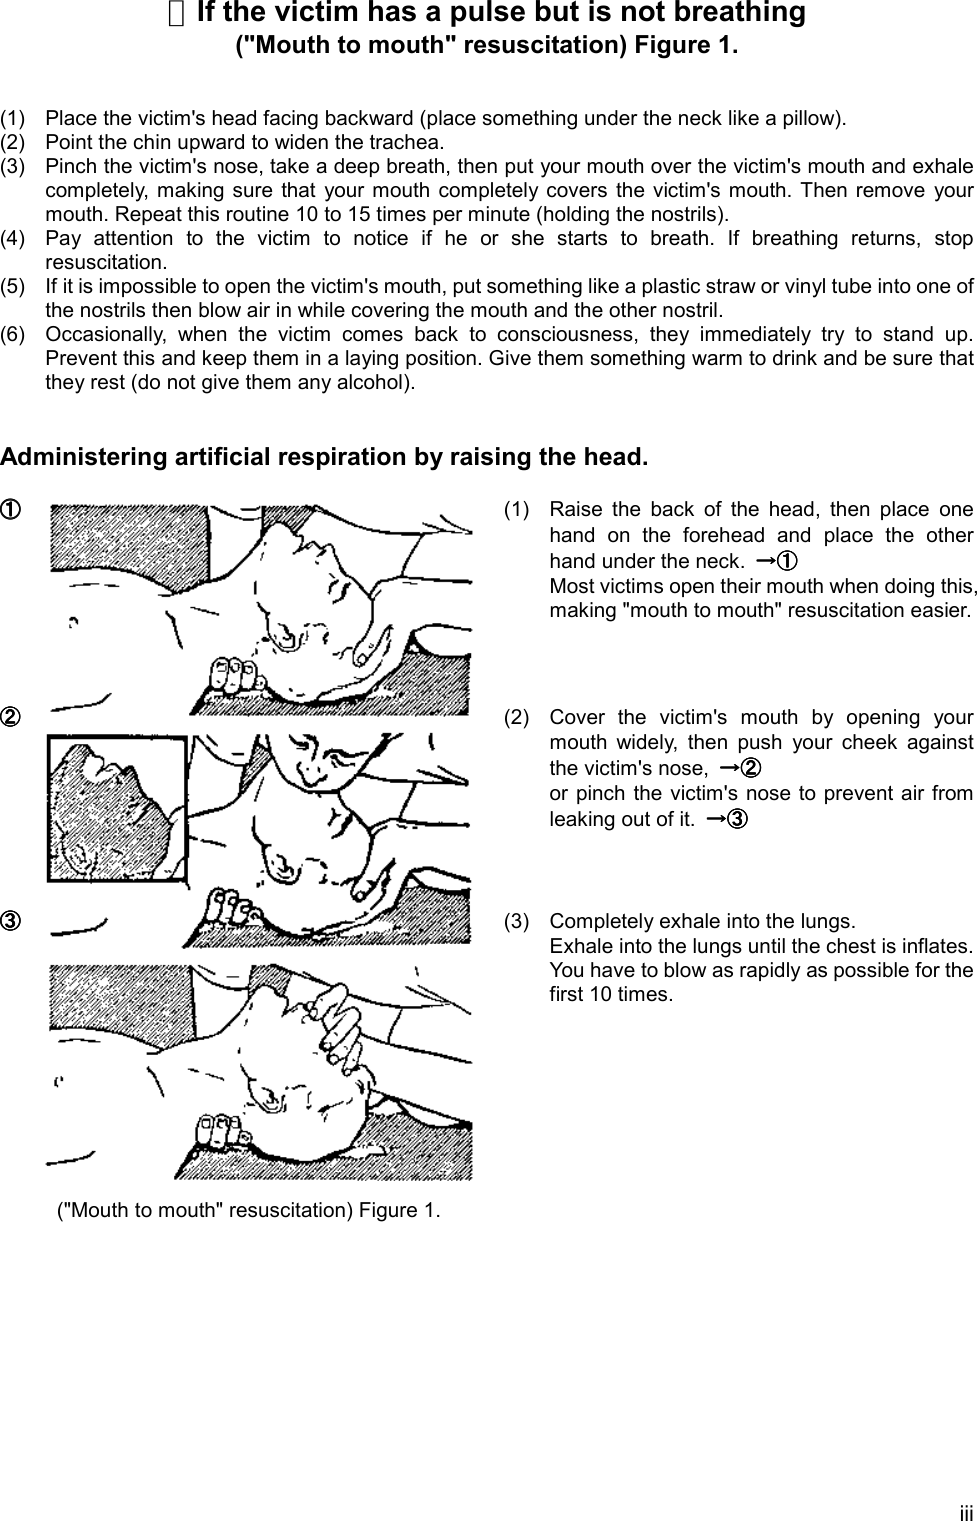 iii☆If the victim has a pulse but is not breathing(&quot;Mouth to mouth&quot; resuscitation) Figure 1.(1) Place the victim&apos;s head facing backward (place something under the neck like a pillow).(2) Point the chin upward to widen the trachea.(3) Pinch the victim&apos;s nose, take a deep breath, then put your mouth over the victim&apos;s mouth and exhalecompletely, making sure that your mouth completely covers the victim&apos;s mouth. Then remove yourmouth. Repeat this routine 10 to 15 times per minute (holding the nostrils).(4) Pay attention to the victim to notice if he or she starts to breath. If breathing returns, stopresuscitation.(5) If it is impossible to open the victim&apos;s mouth, put something like a plastic straw or vinyl tube into one ofthe nostrils then blow air in while covering the mouth and the other nostril.(6) Occasionally, when the victim comes back to consciousness, they immediately try to stand up.Prevent this and keep them in a laying position. Give them something warm to drink and be sure thatthey rest (do not give them any alcohol).Administering artificial respiration by raising the head.①①①①(1) Raise the back of the head, then place onehand on the forehead and place the otherhand under the neck. →①→①→①→①Most victims open their mouth when doing this,making &quot;mouth to mouth&quot; resuscitation easier.②②②②(2) Cover the victim&apos;s mouth by opening yourmouth widely, then push your cheek againstthe victim&apos;s nose,  →②→②→②→②or pinch the victim&apos;s nose to prevent air fromleaking out of it.  →③→③→③→③③③③③(3) Completely exhale into the lungs.Exhale into the lungs until the chest is inflates.You have to blow as rapidly as possible for thefirst 10 times.(&quot;Mouth to mouth&quot; resuscitation) Figure 1.